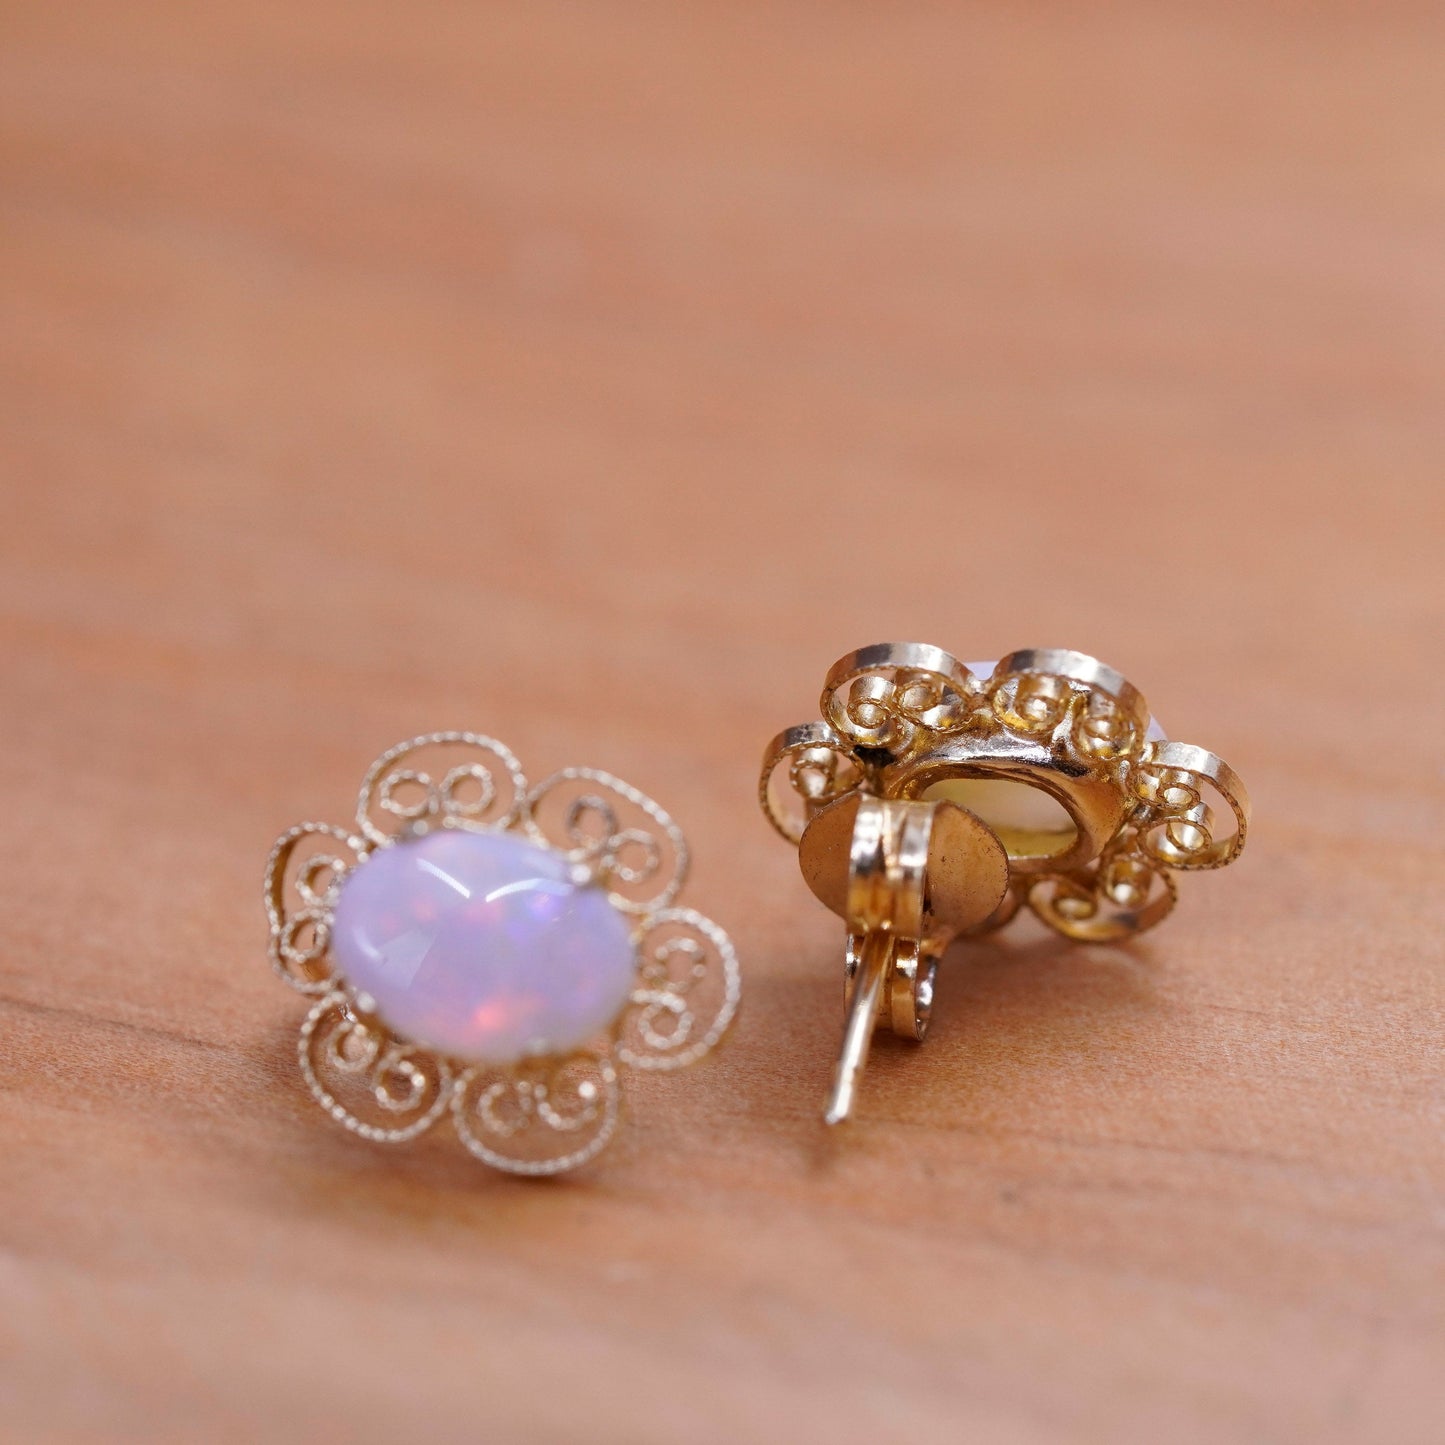 1g, filigree 14K yellow gold studs earrings with opal inlay